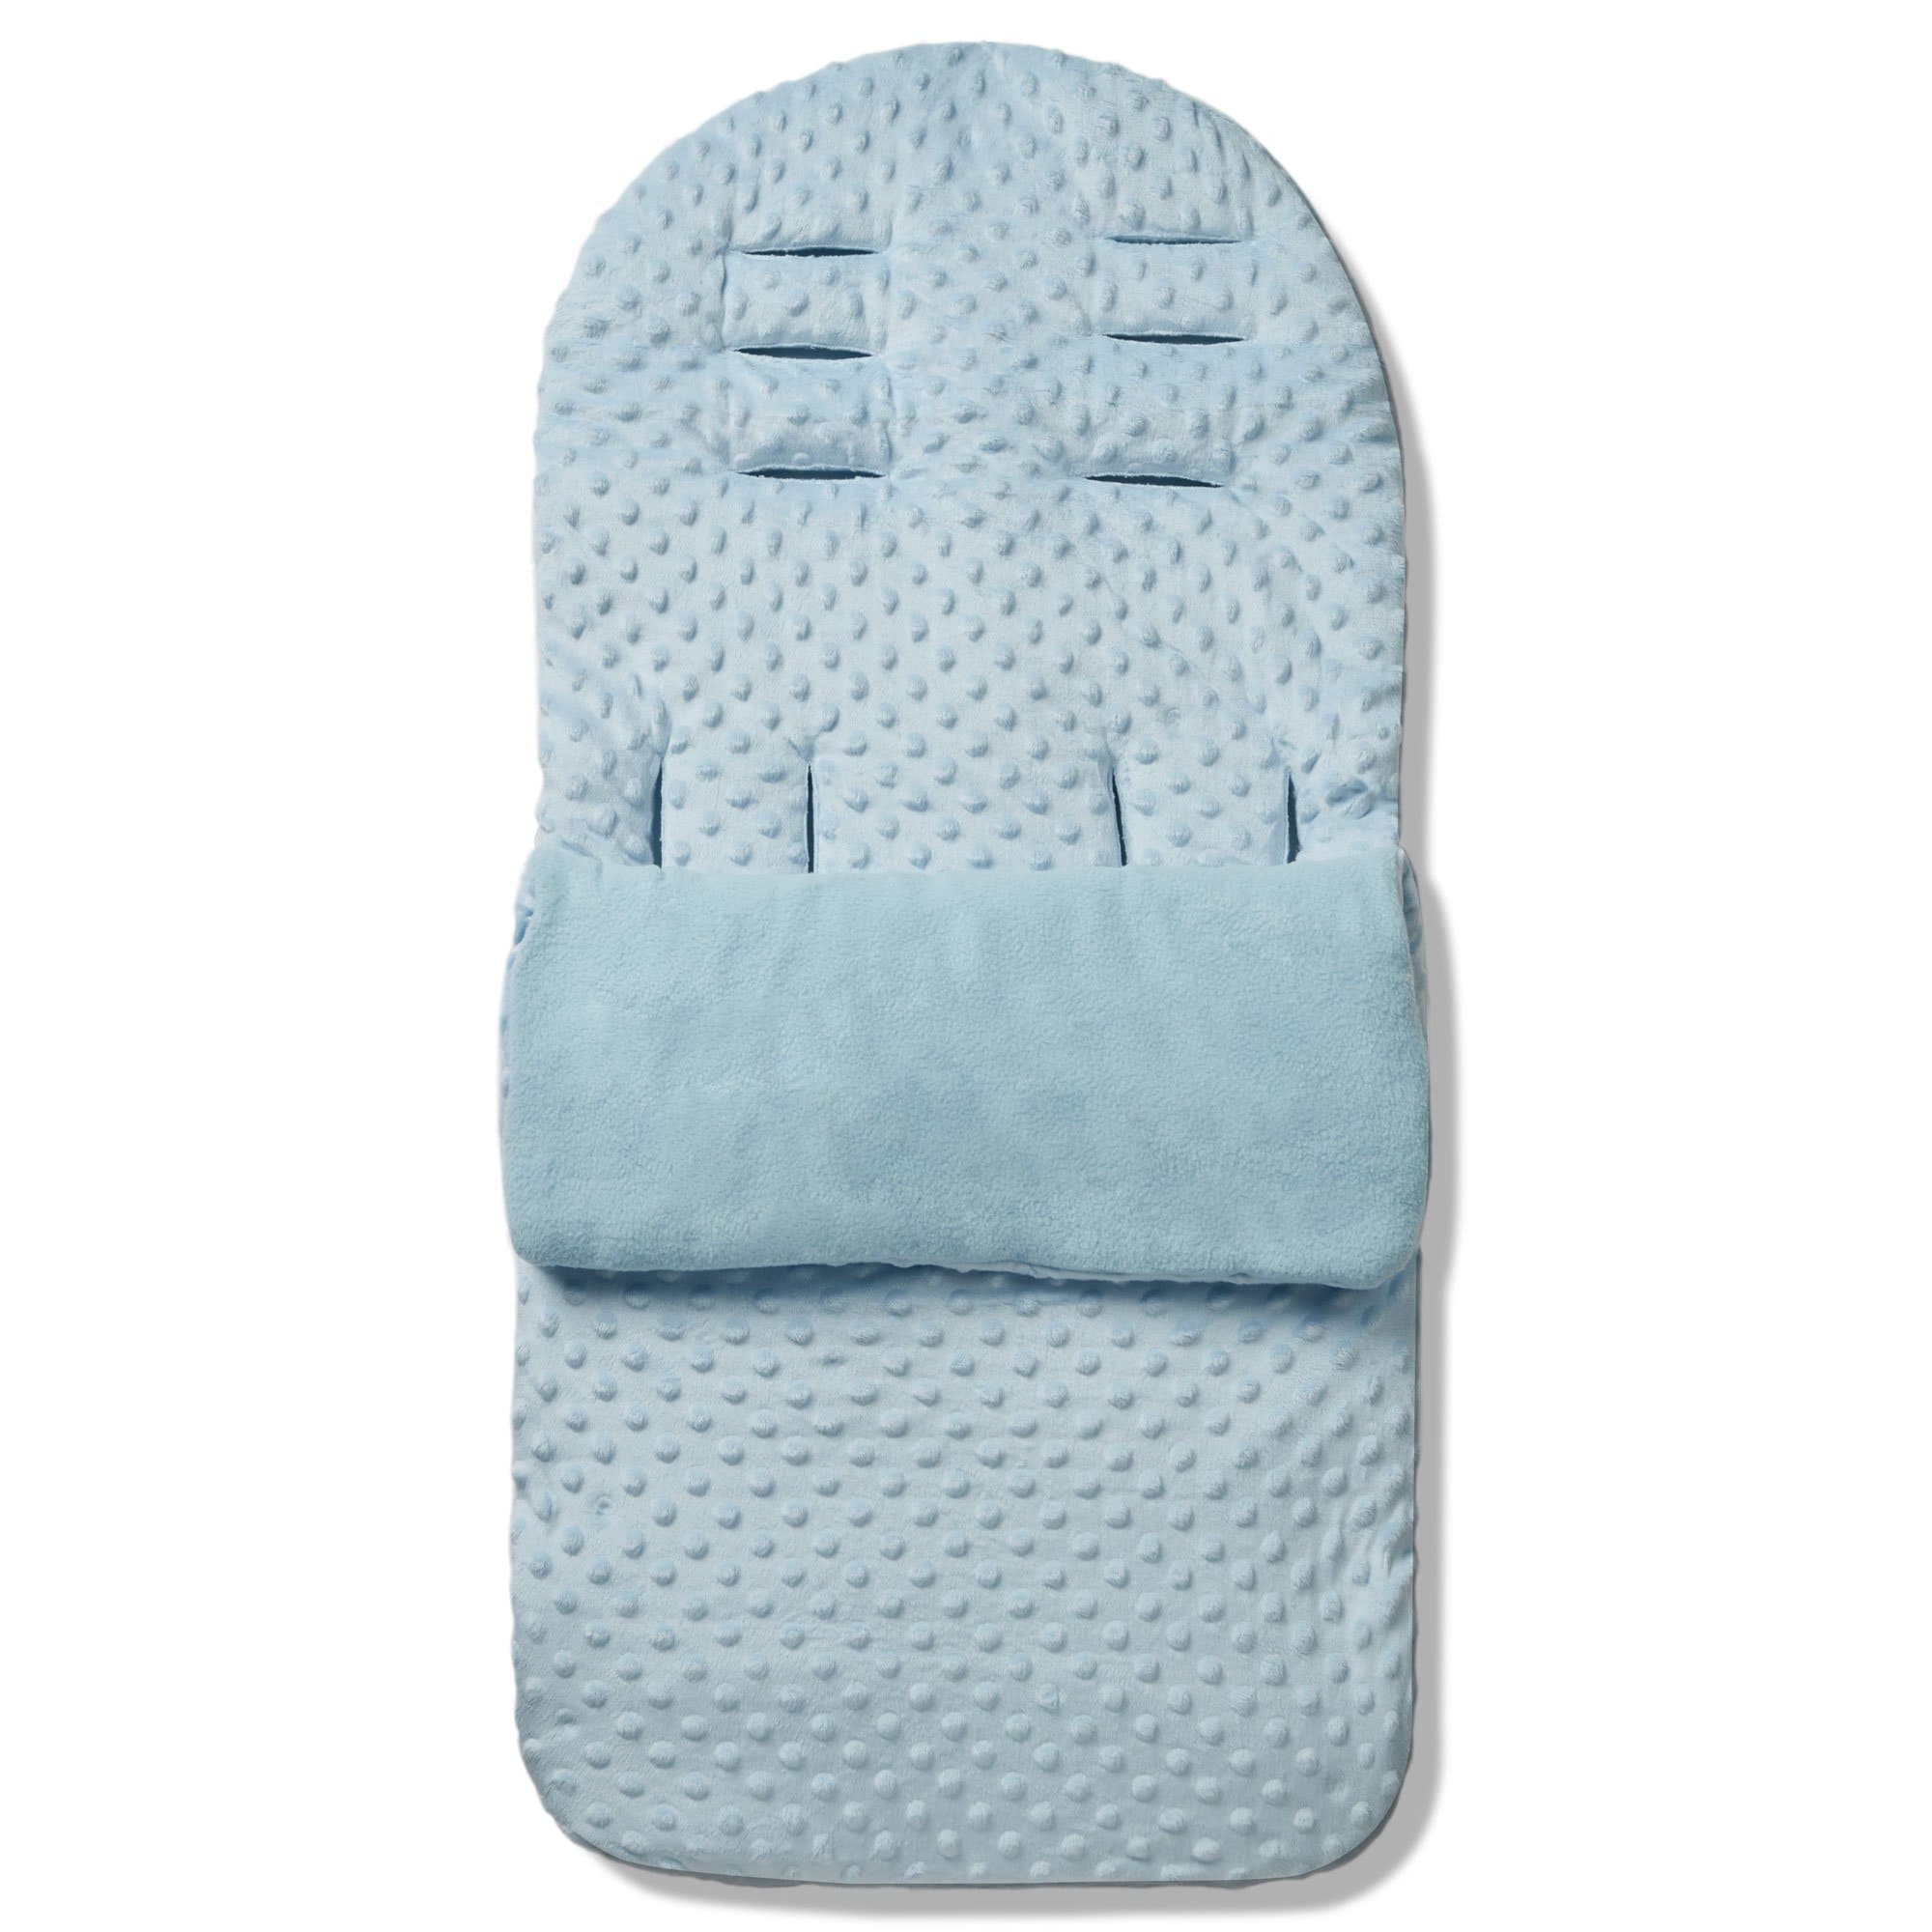 Dimple Footmuff / Cosy Toes Compatible with I'coo - Blue / Fits All Models | For Your Little One